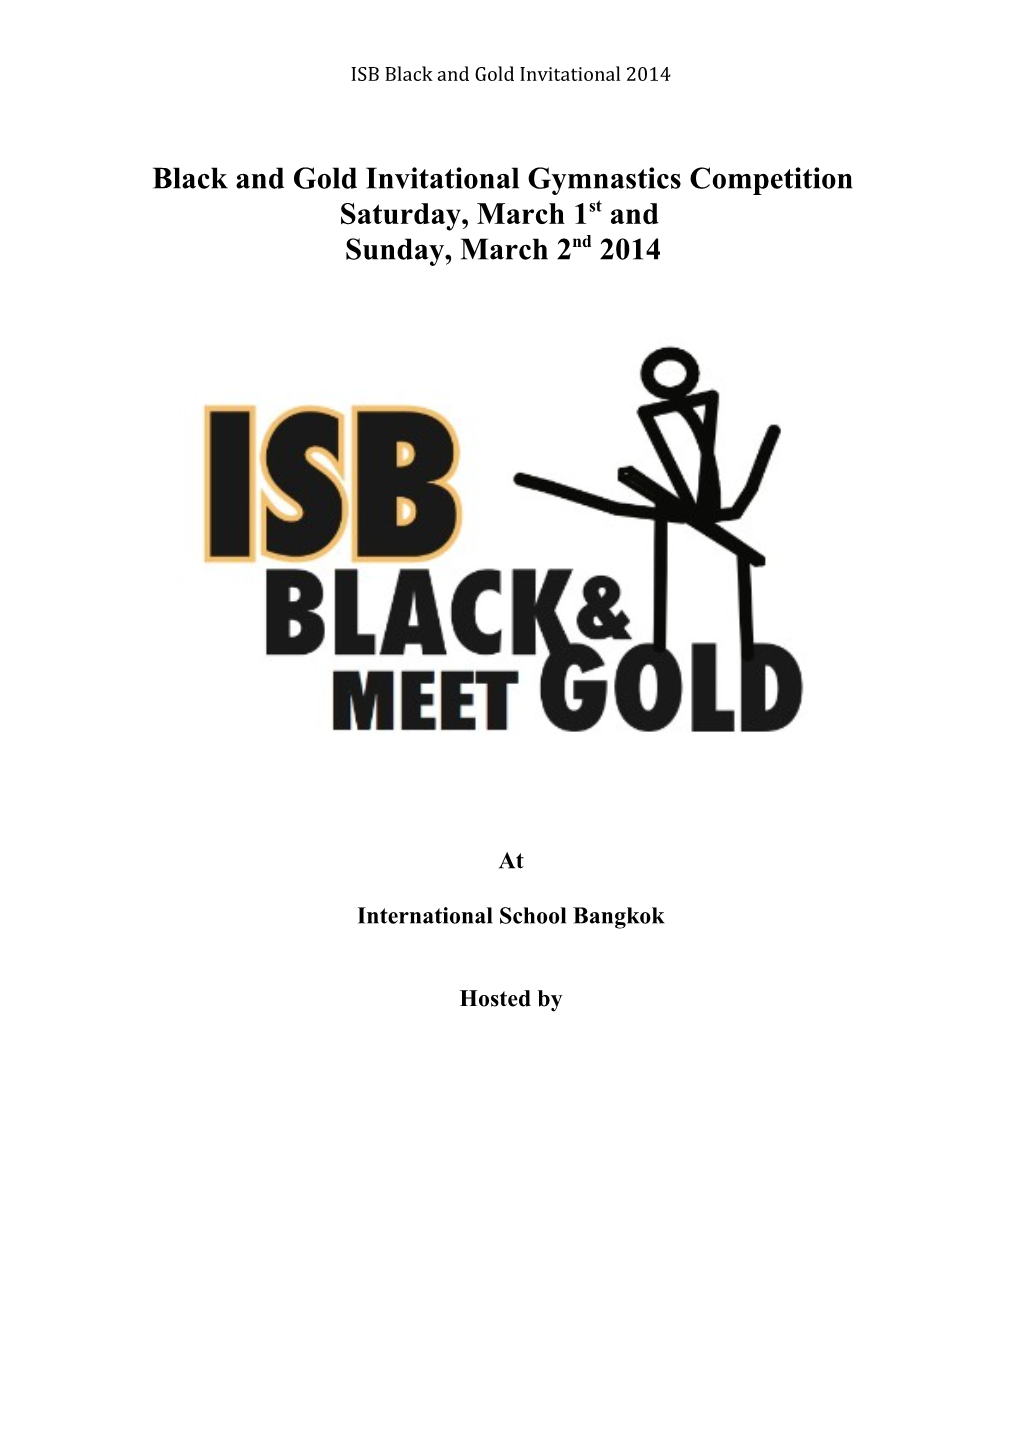 Black and Gold Invitational Gymnastics Competition